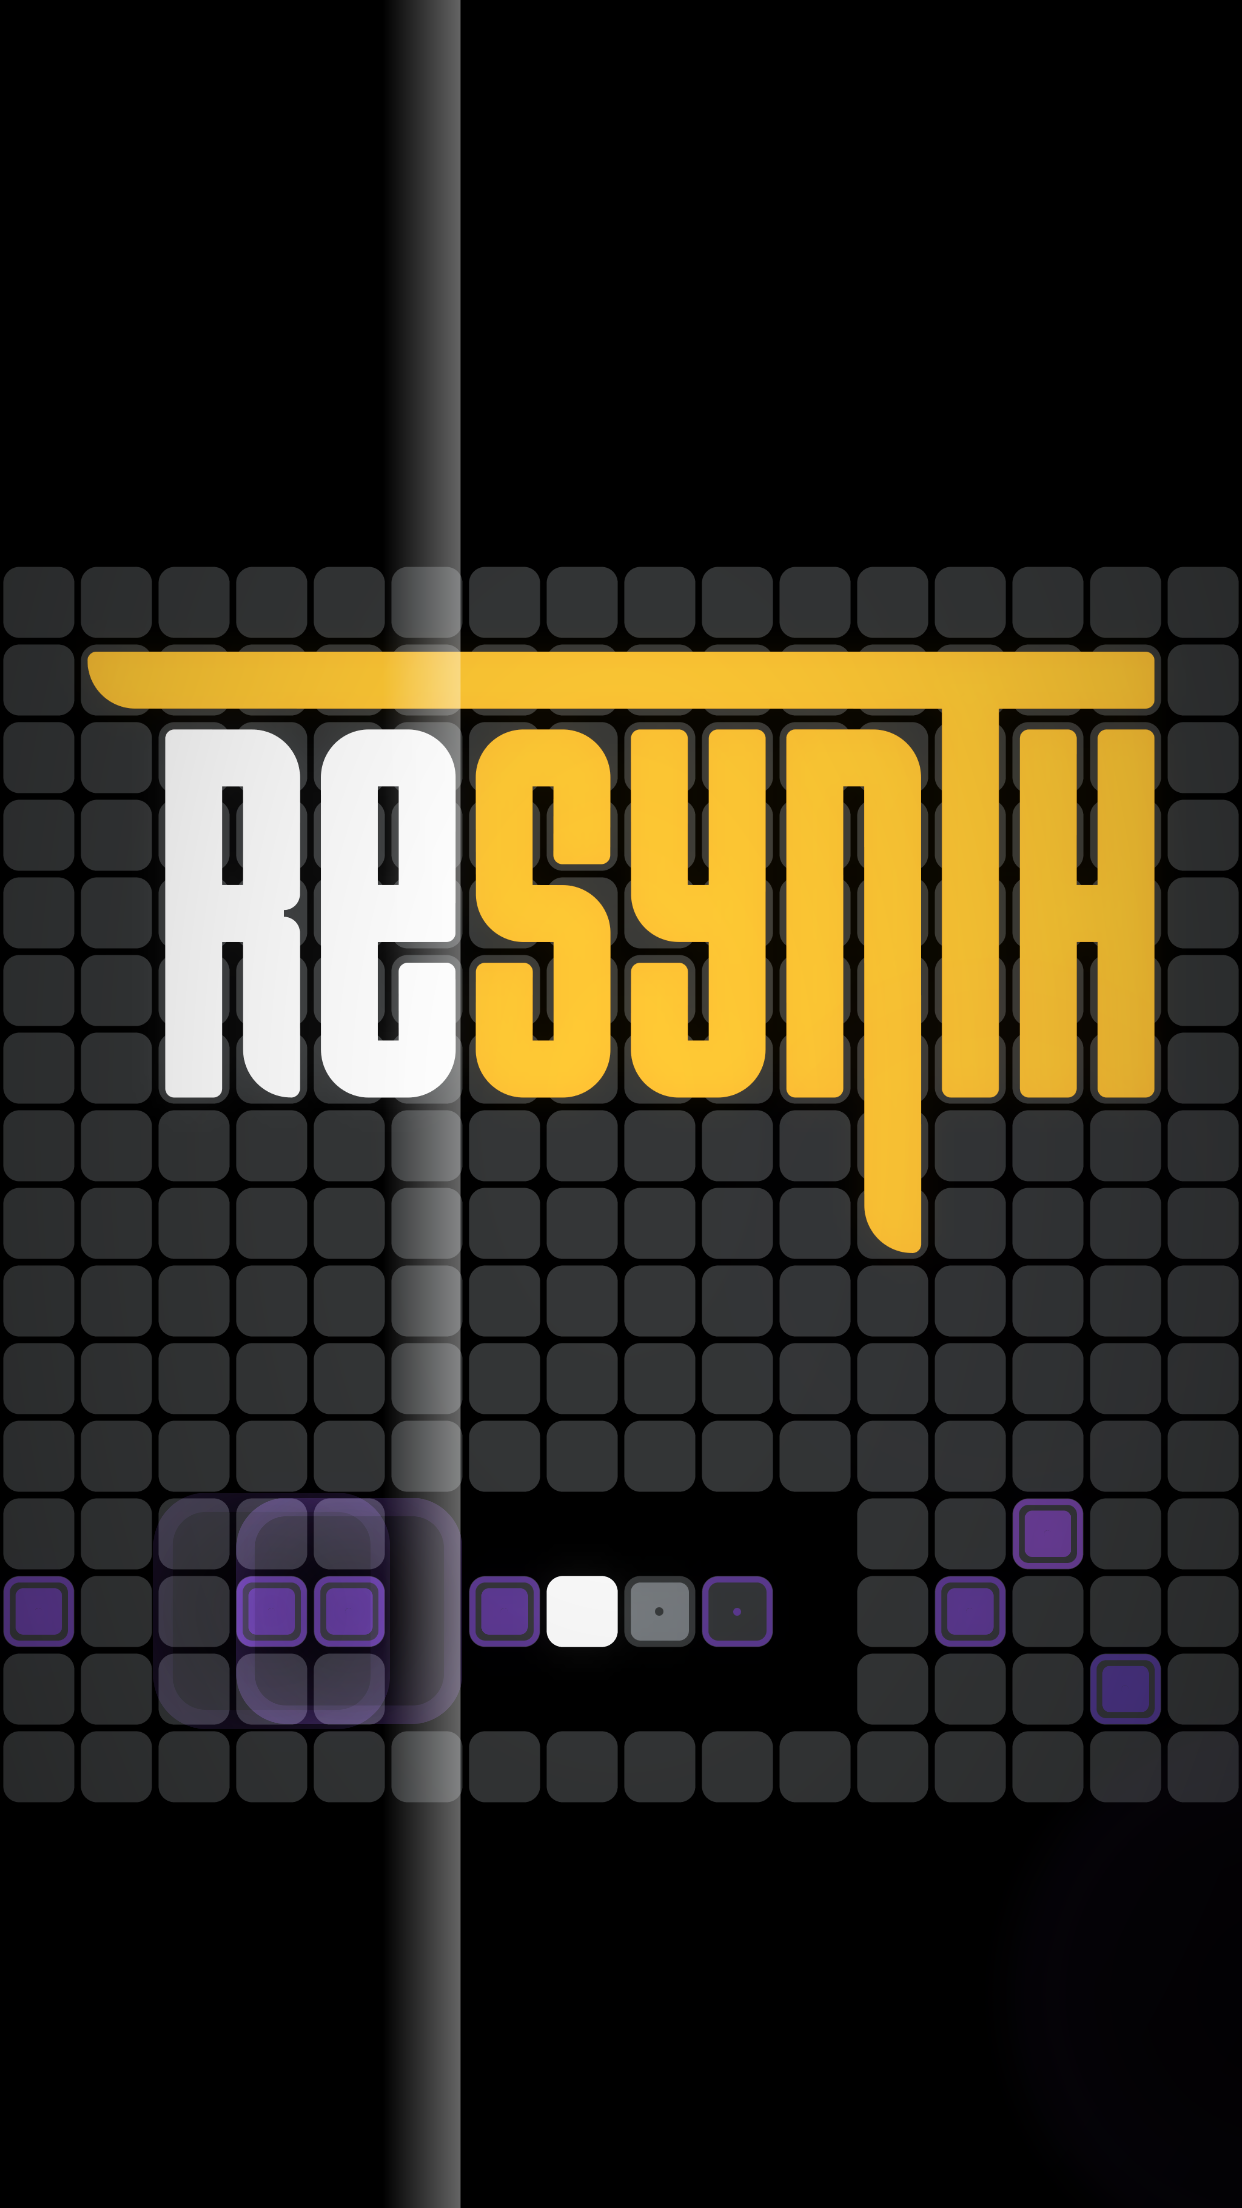 00-Resynth-iPhone-DK-01.png